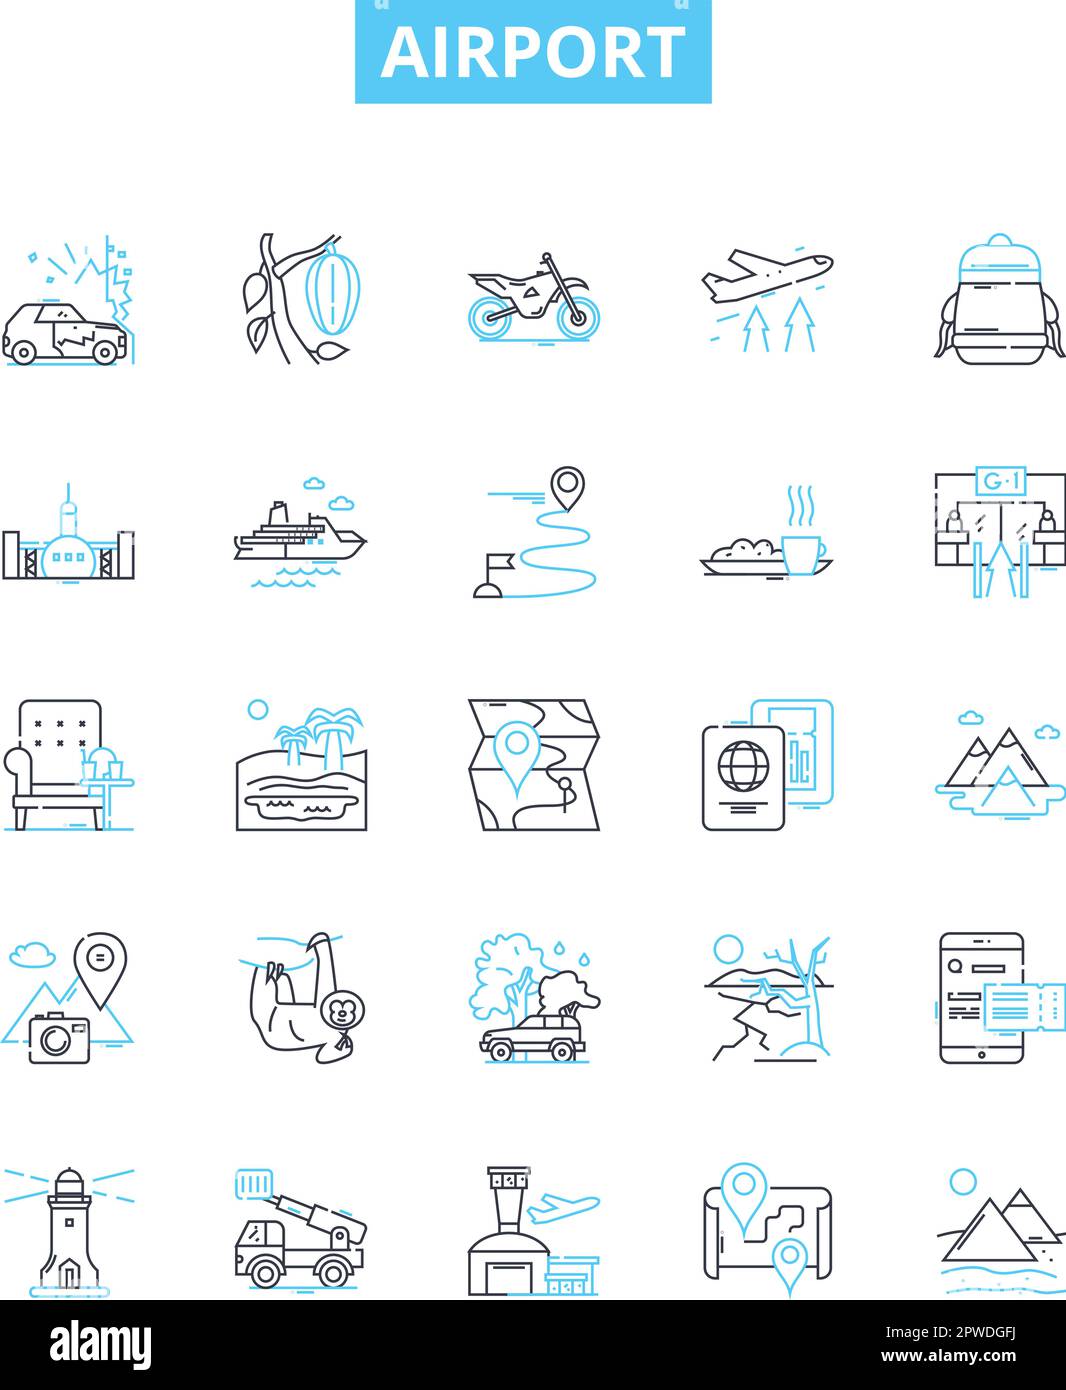 Airport vector line icons set. Airport, Terminal, Check-in, Terminal-, TSA, Runway, Arrival illustration outline concept symbols and signs Stock Vector